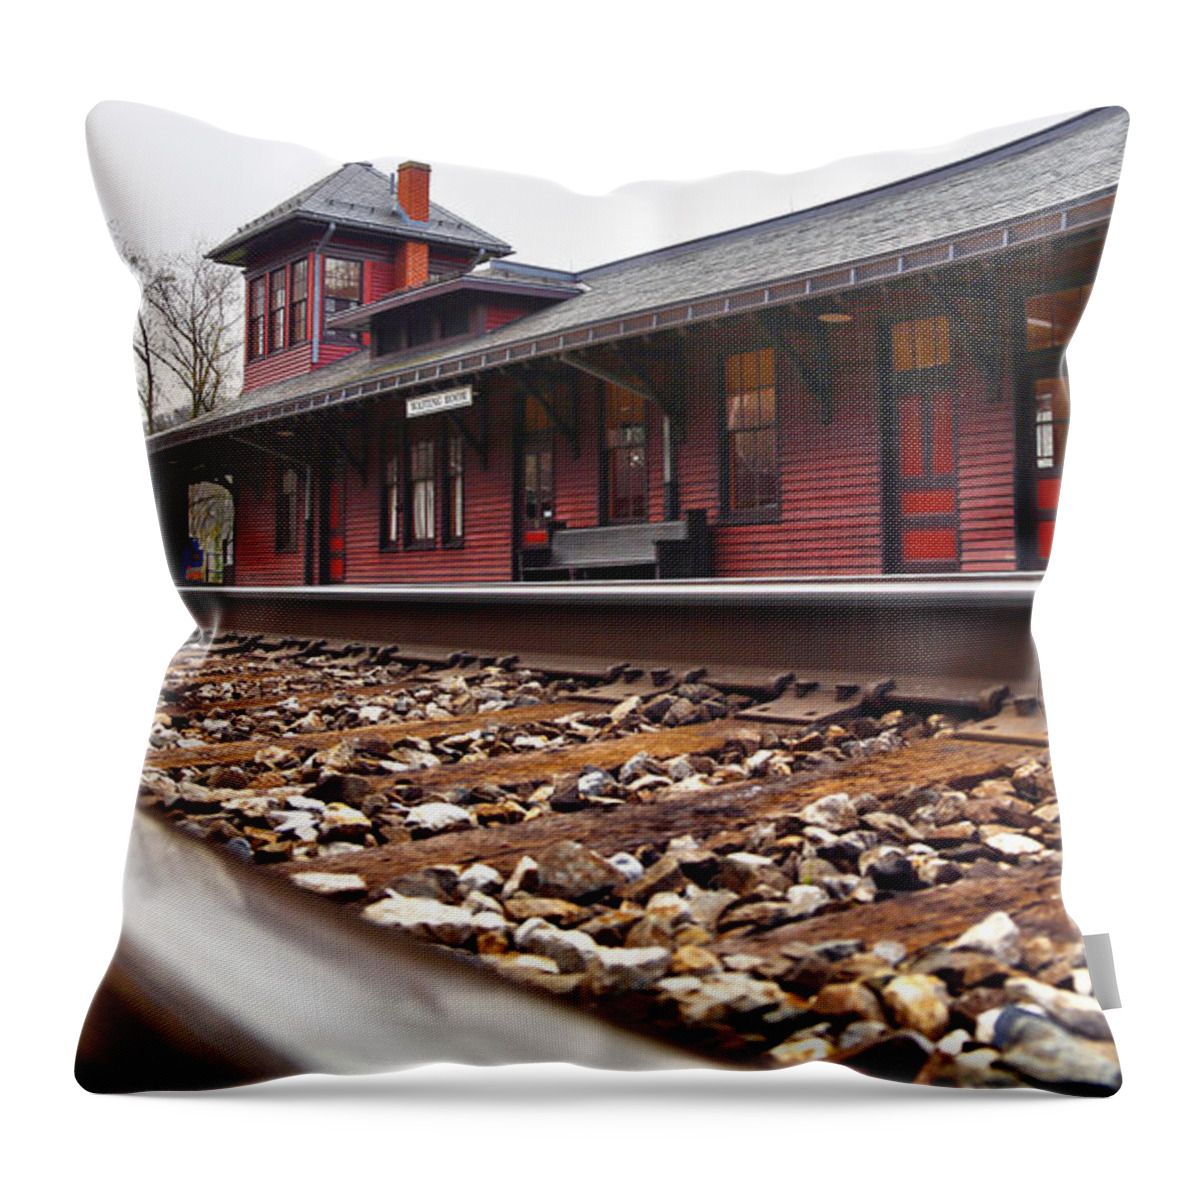 Train Station Throw Pillow featuring the photograph Train Station by Mitch Cat